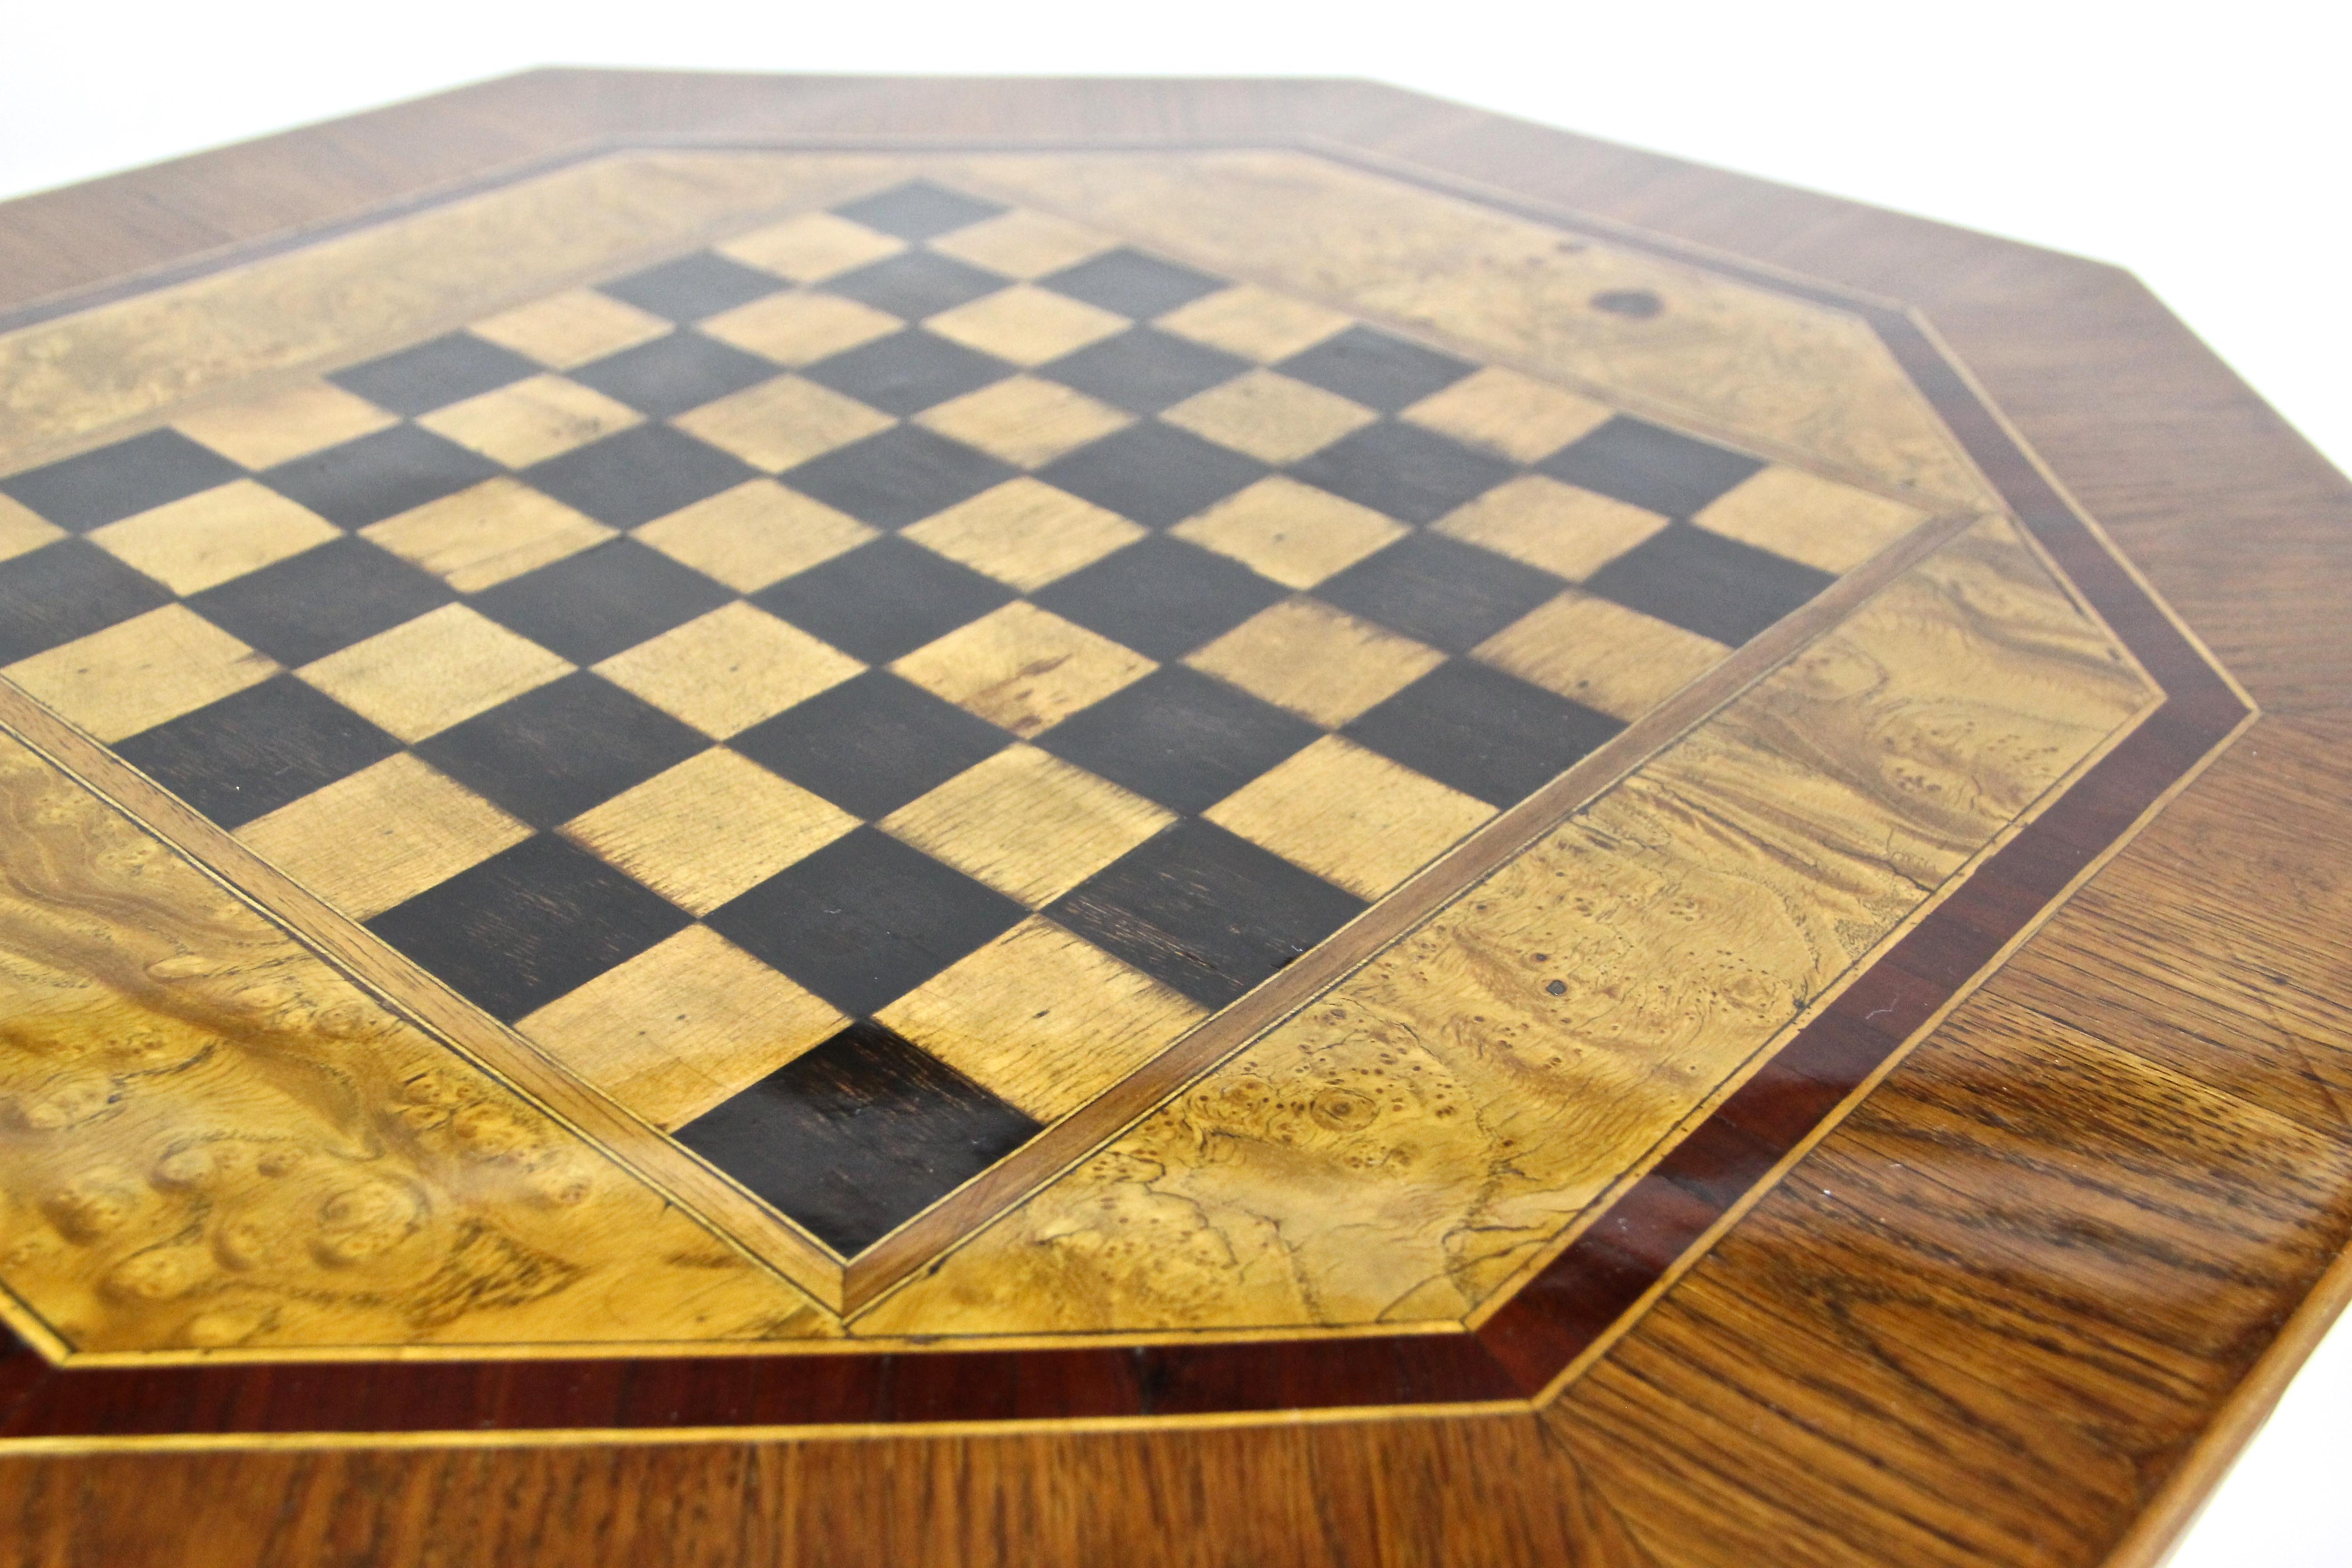 Exclusive Biedermeier chess table from the period in Austria, circa 1840. The substructure, made of spruce wood, was veneered with very thick oakwood in a beautiful manner. A fantastic octagon shaped design runs from the base up to the top showing